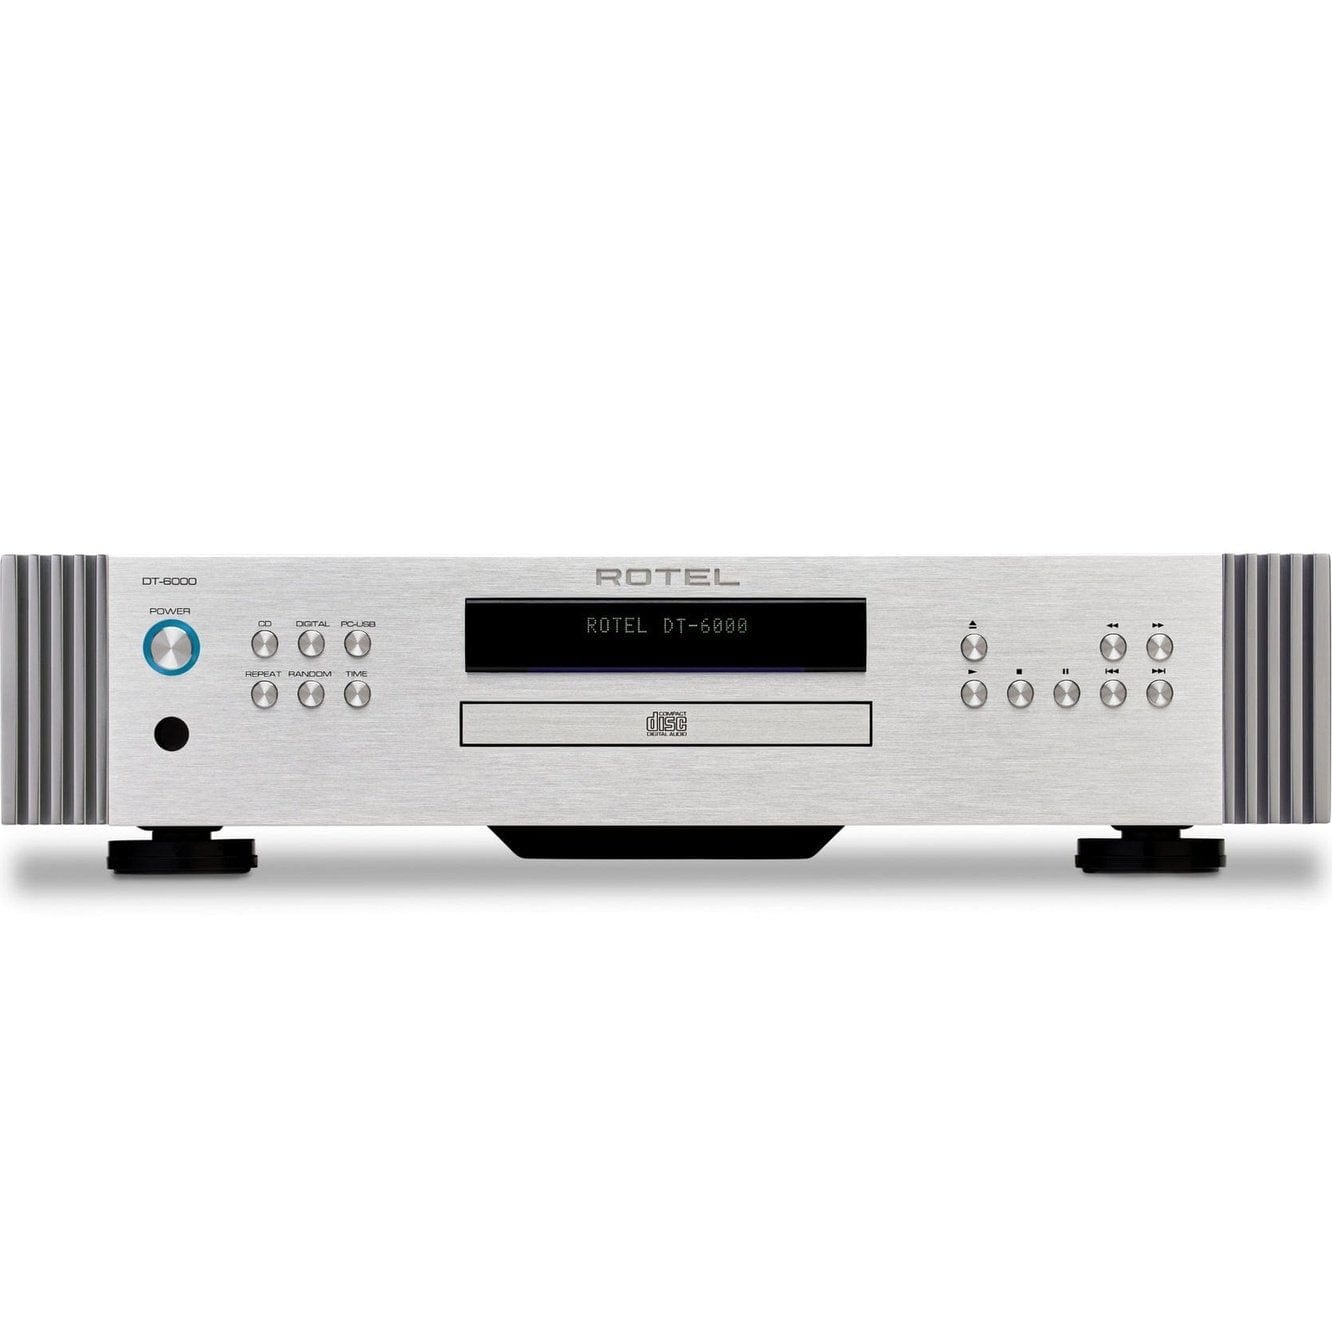 Rotel Rotel Diamond Series DT-6000 CD Player DAC - Silver Open Box Return CD Players